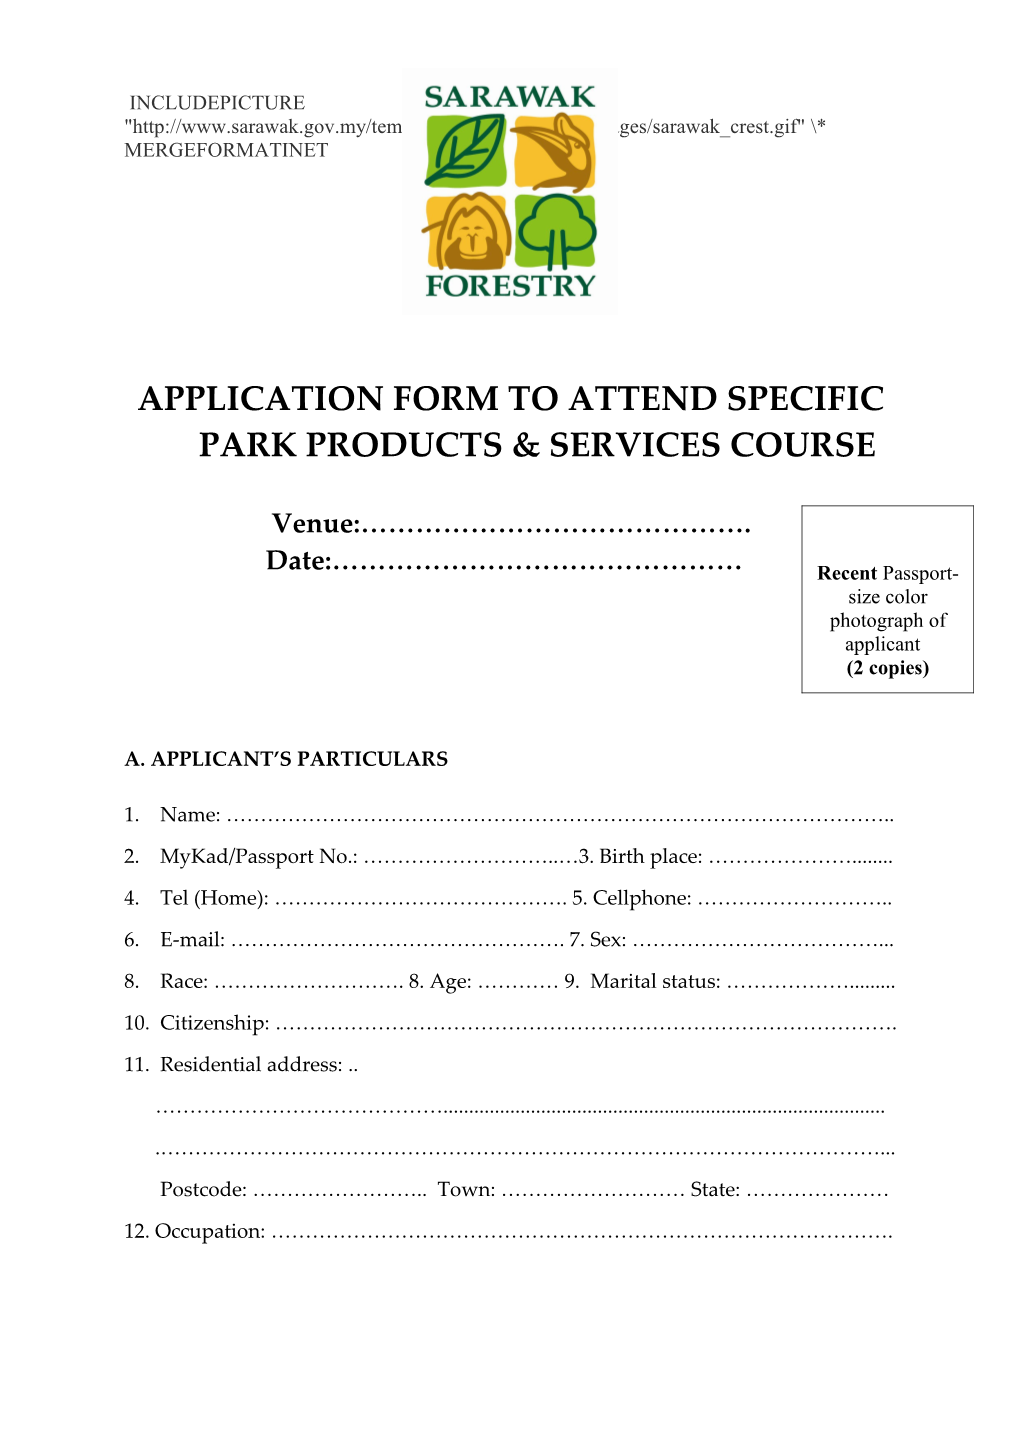 Application Form to Attend Specificparkproducts & Services Course